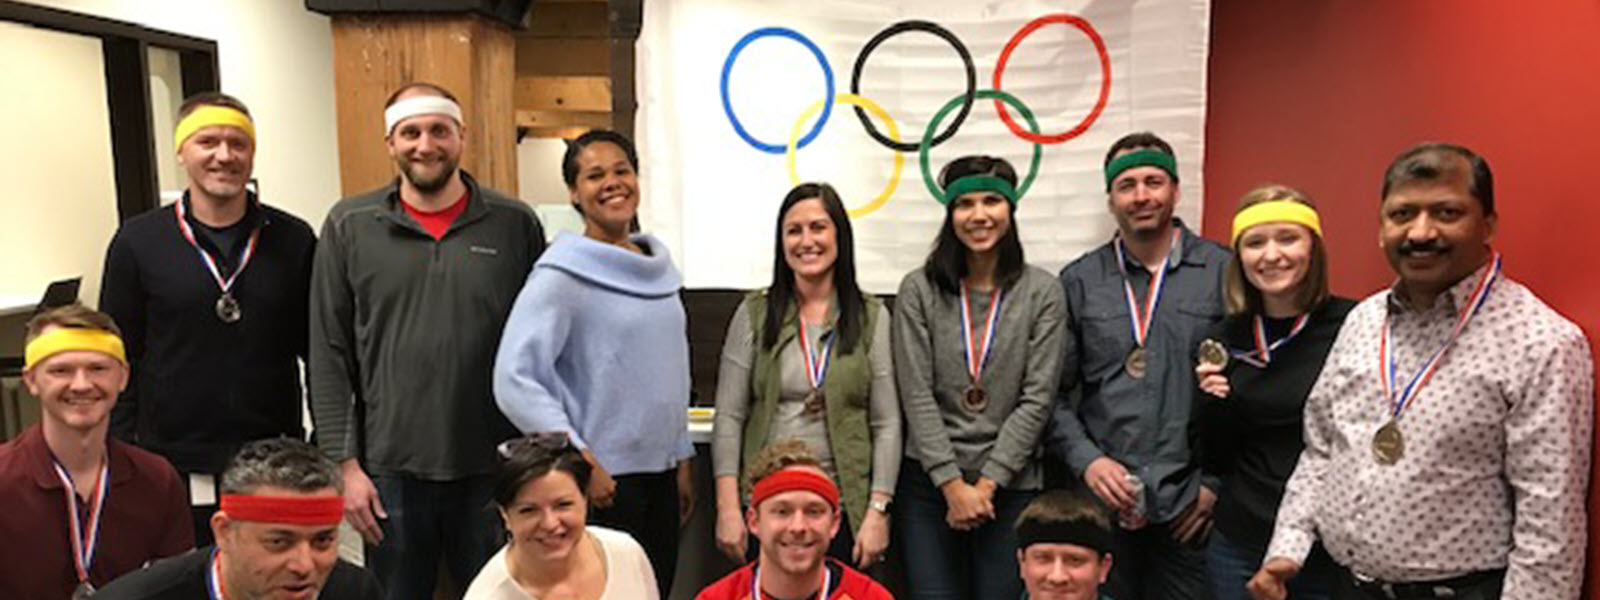 Perficient Minneapolis Office posing for photo at Office Olympics